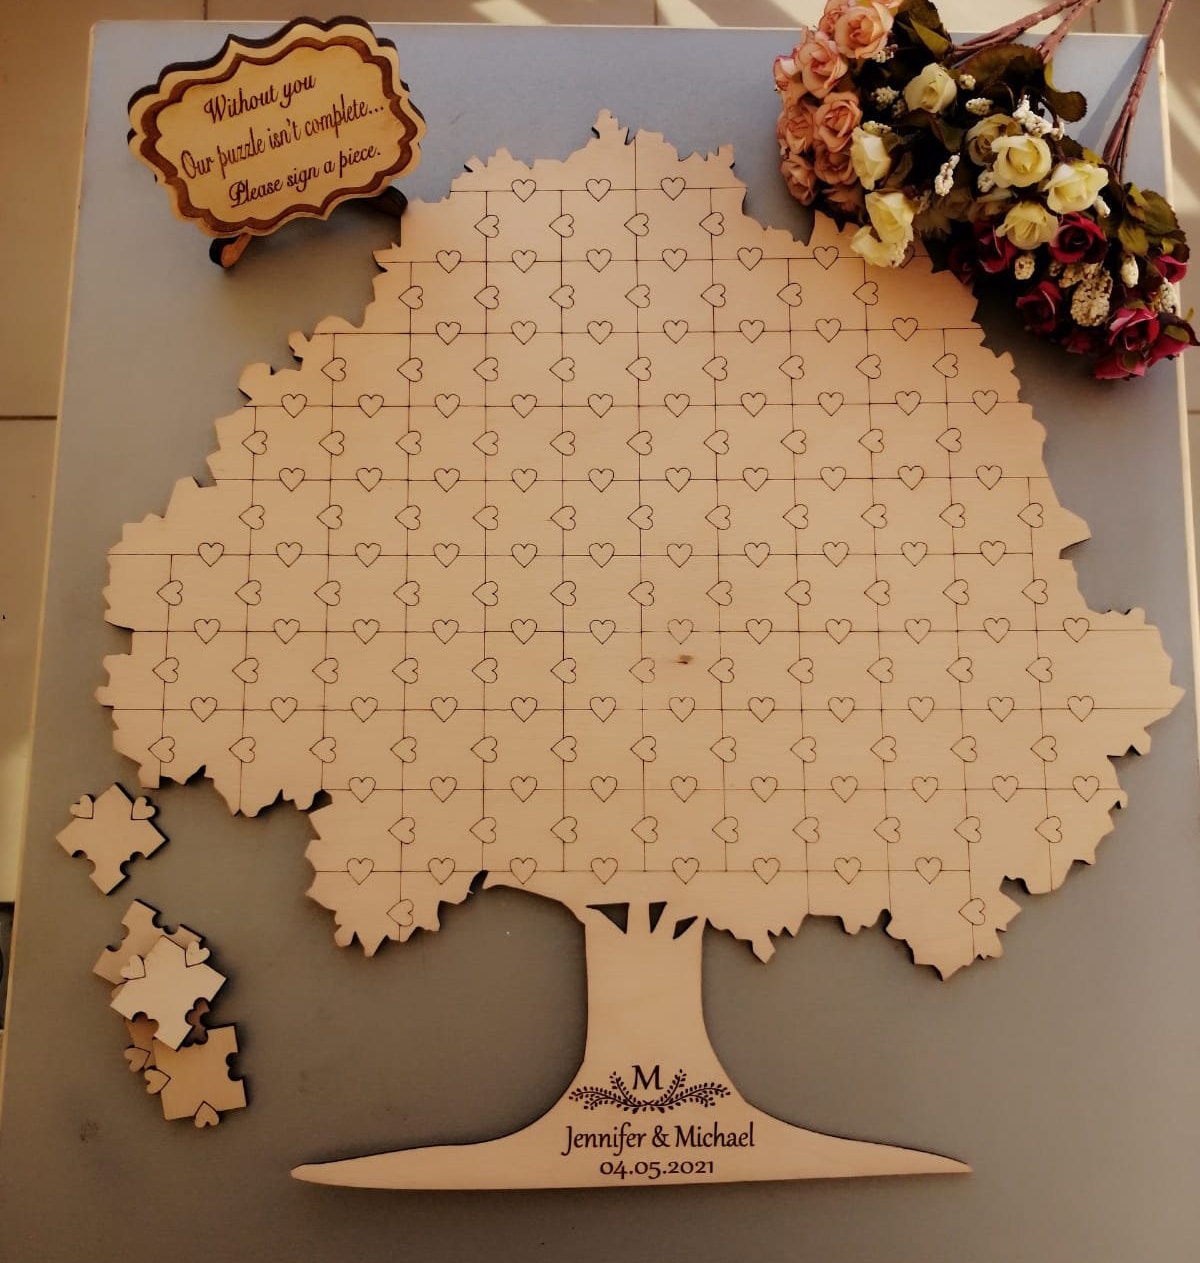 Puzzle Tree Guest Book Custom Wedding Guestbook, Wedding Guest Book, Wedding Guest Book Ideas, Rustic Guestbook Tree Alternative, FREE Sign